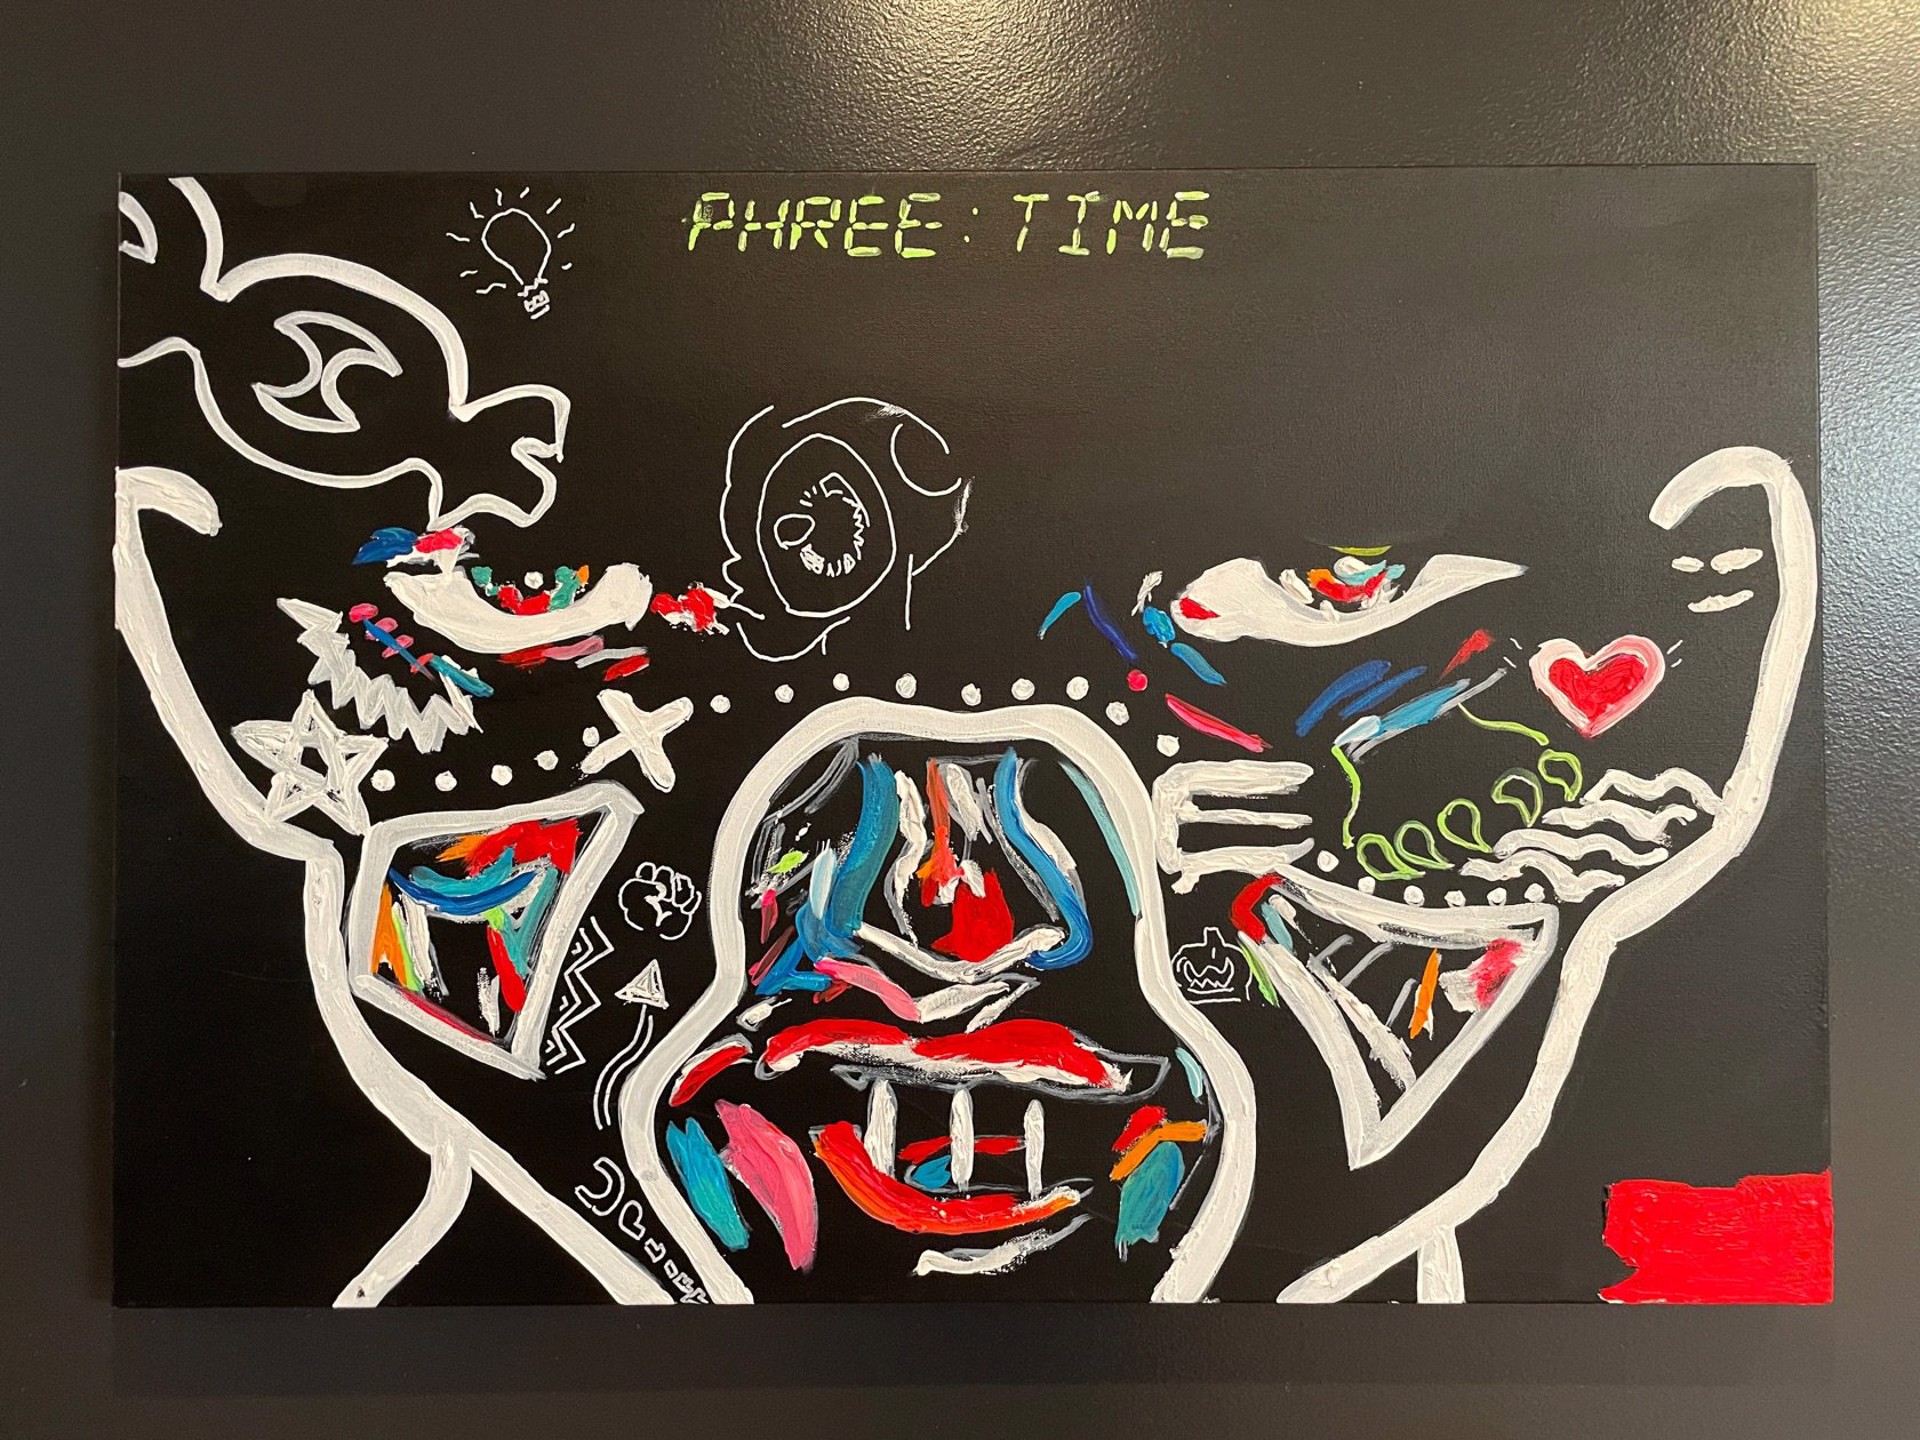 PHREE TIME by PHREE HESTER